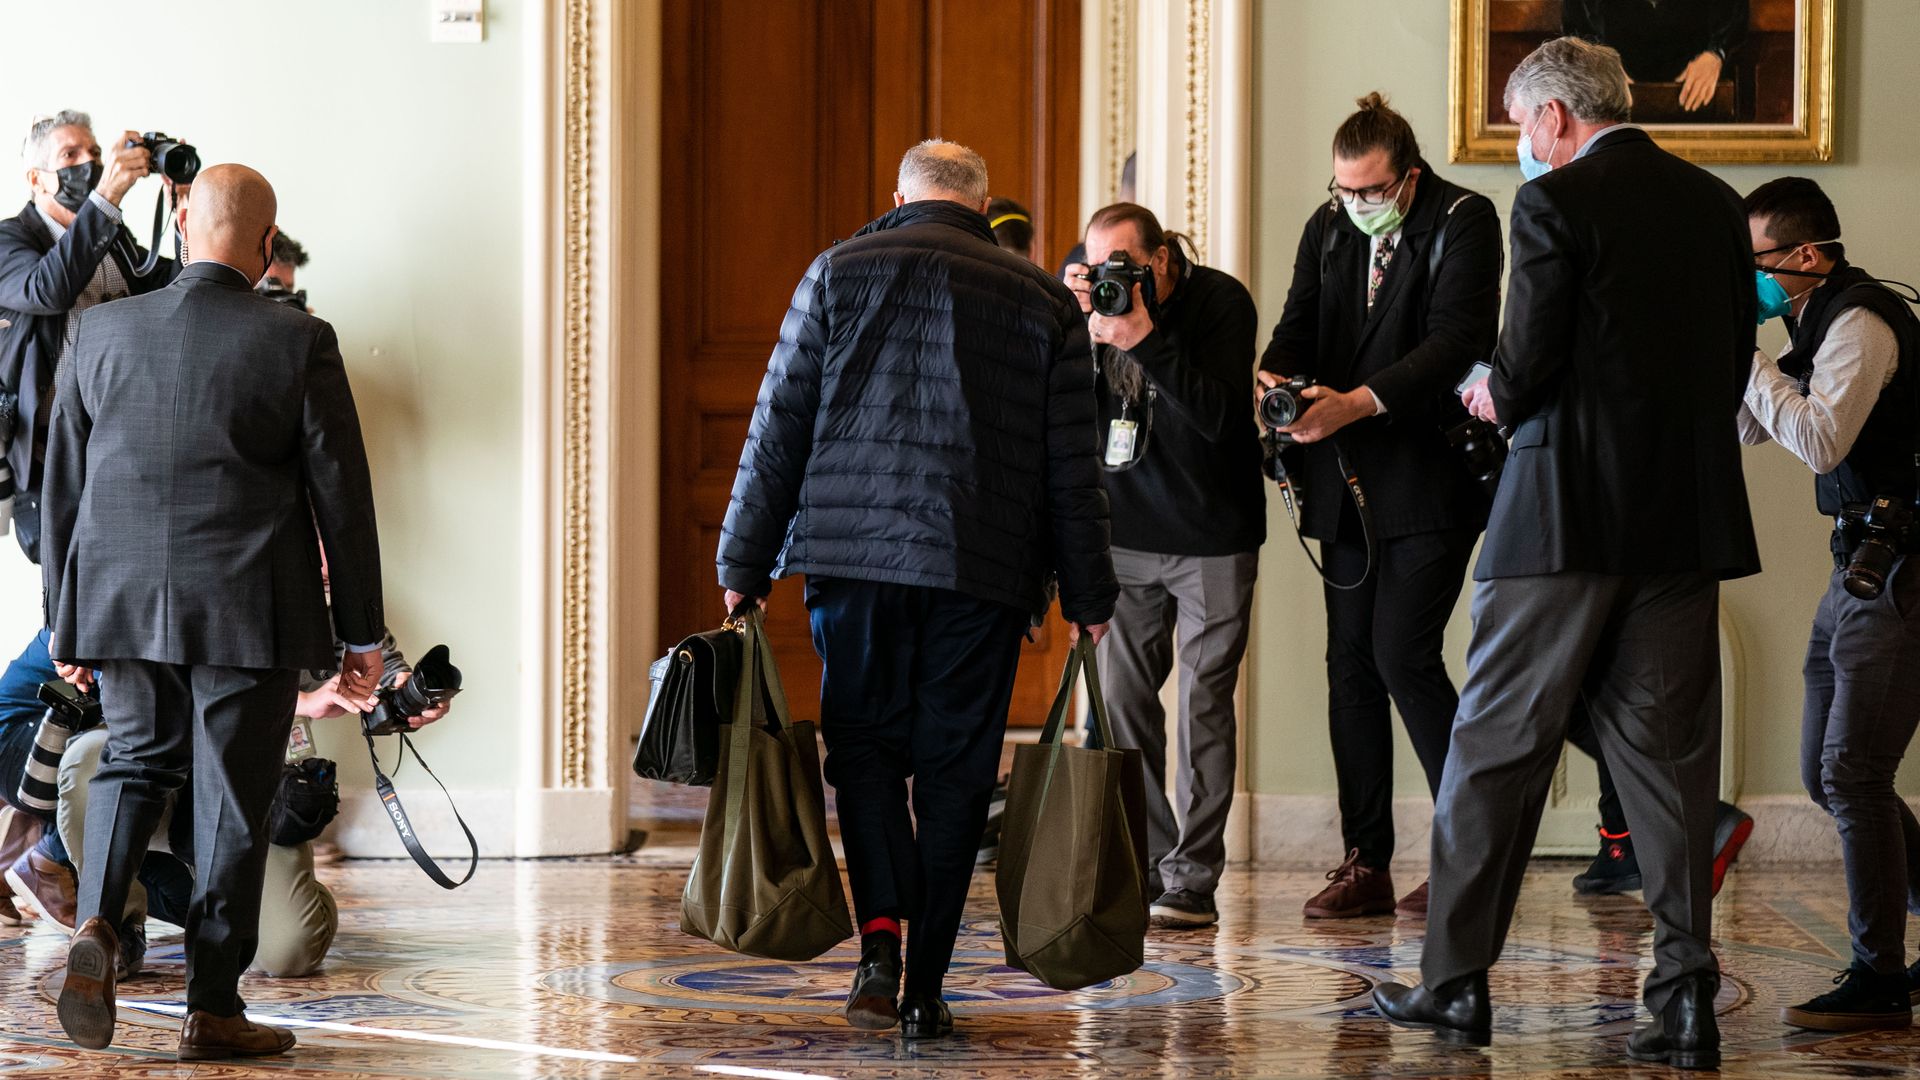 Senate Majority Leader Chuck Schumer is seen surrounded by photographers as he arrives at the Capitol on Monday.